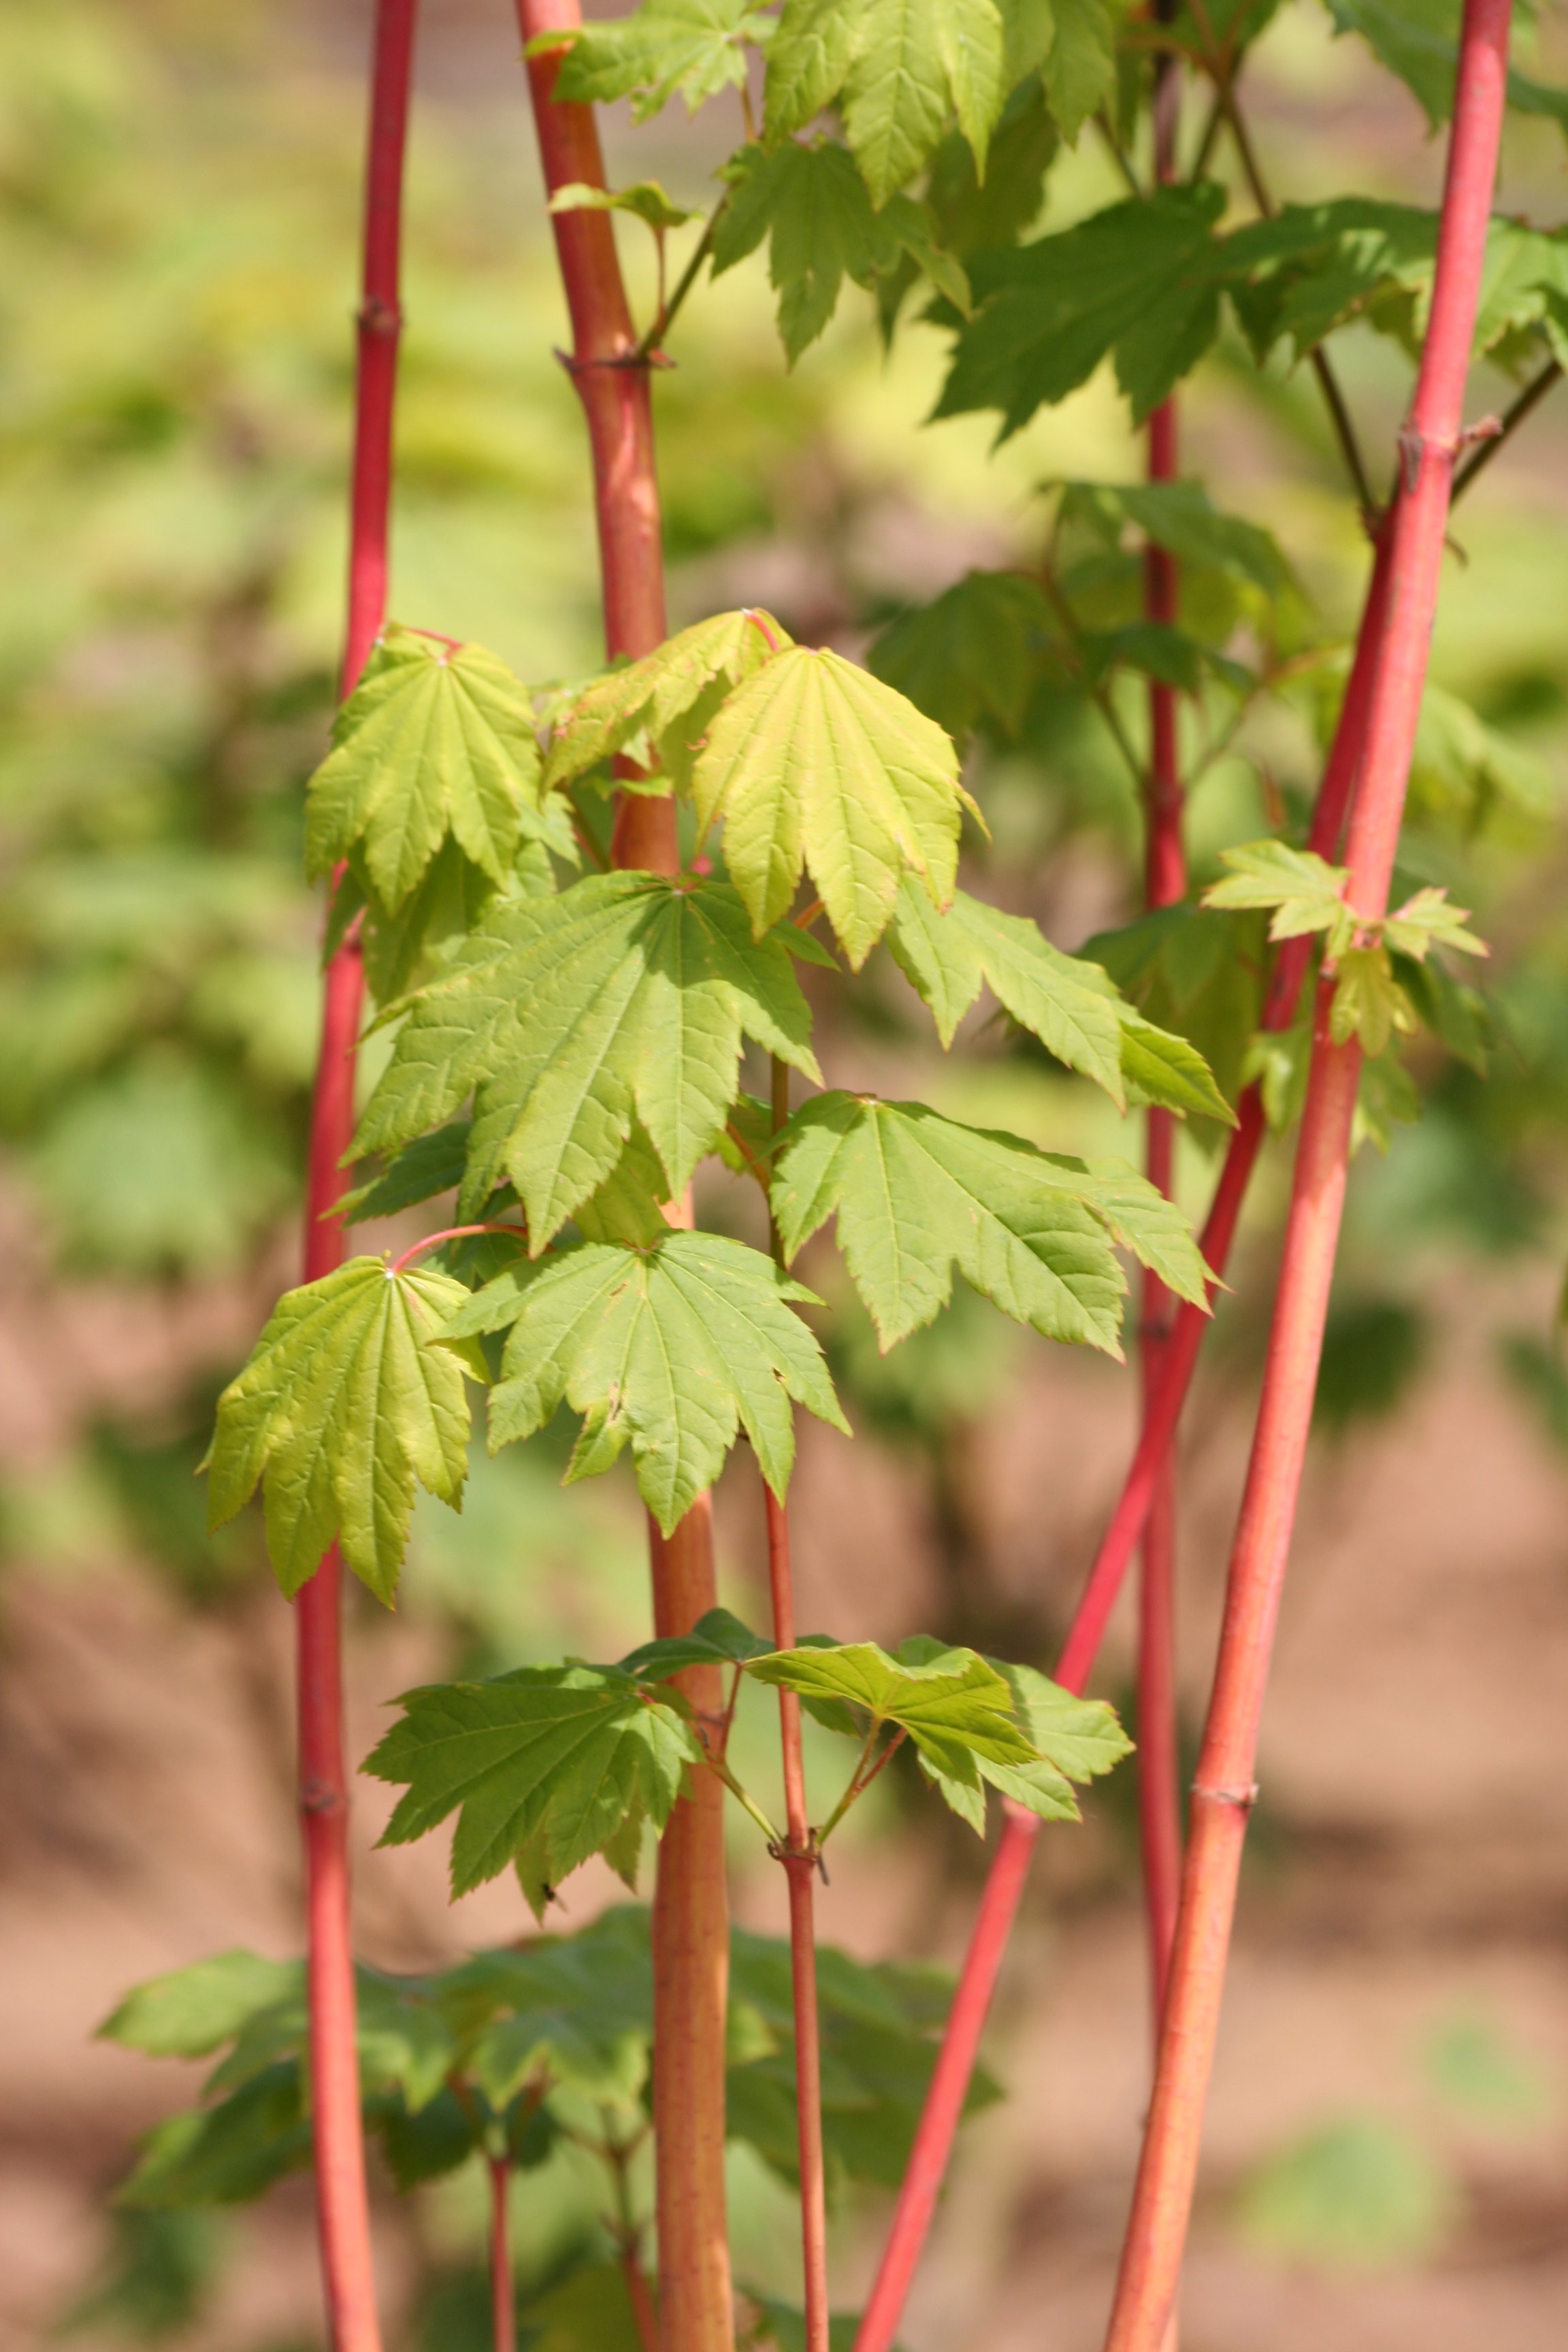 Copy of Pacific Fire Maple grn leaf 04.jpg